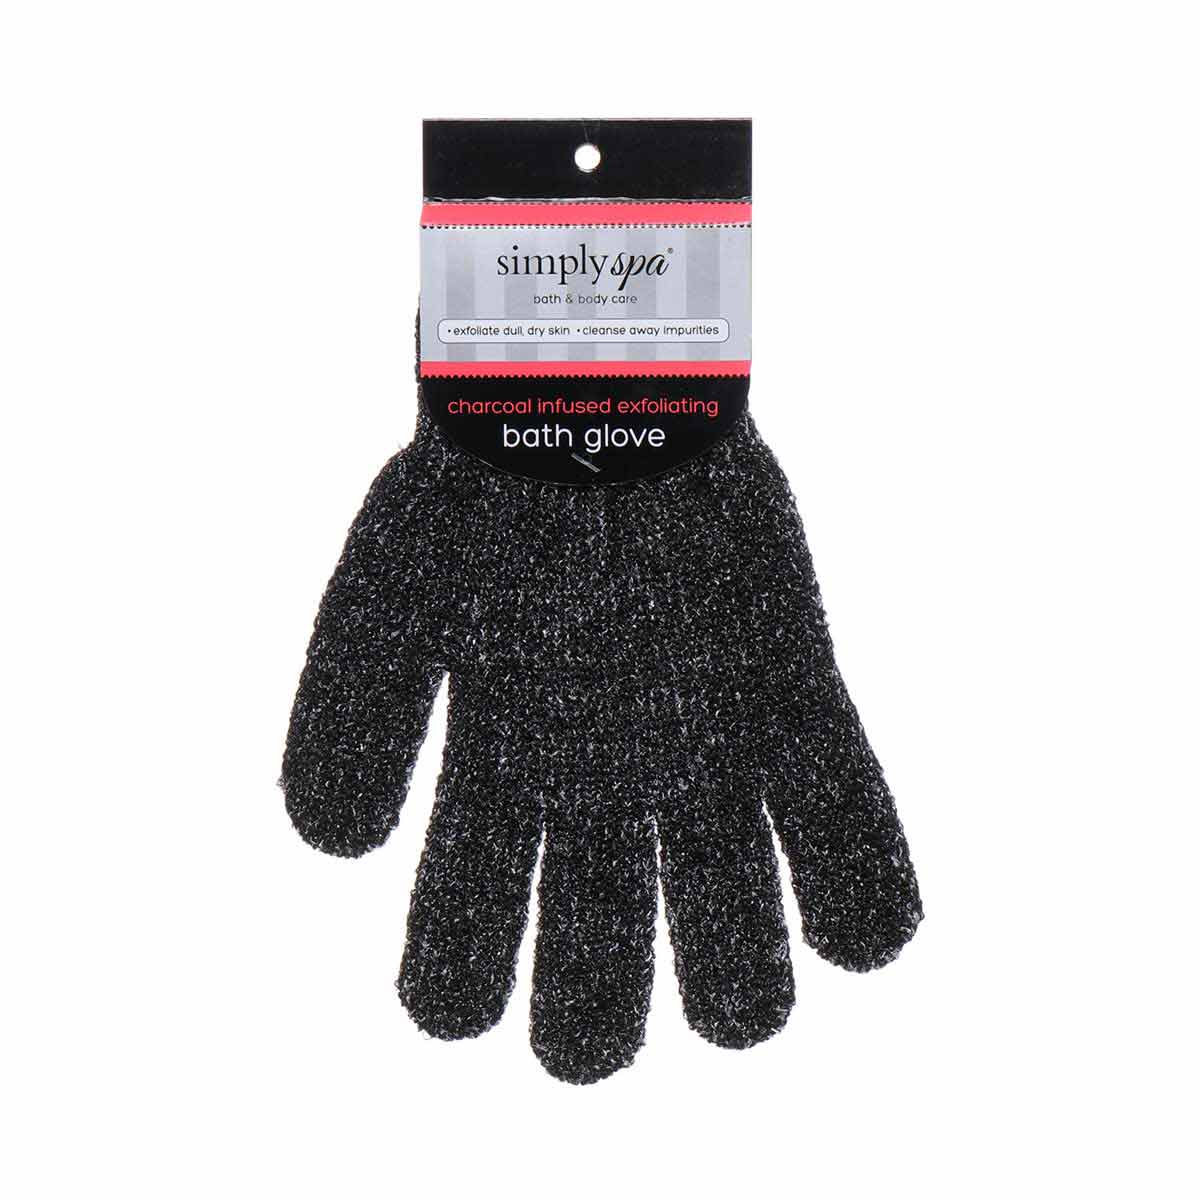 Simply Spa Charcoal Infused Exfoliating Bath Glove 1pc